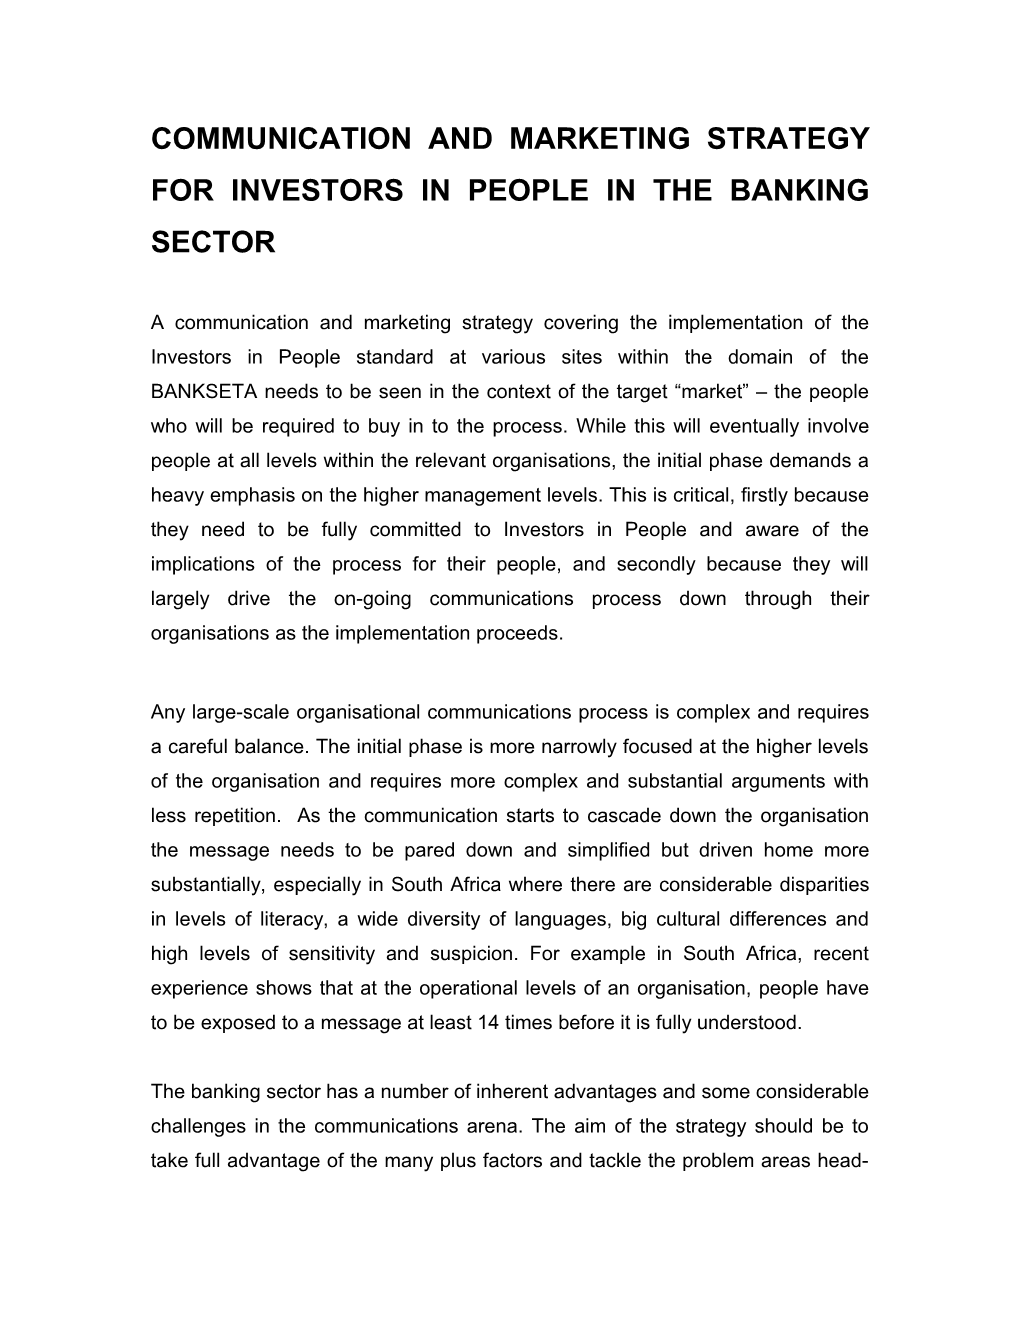 Communication and Marketing Strategy for Investors in People in the Banking Sector